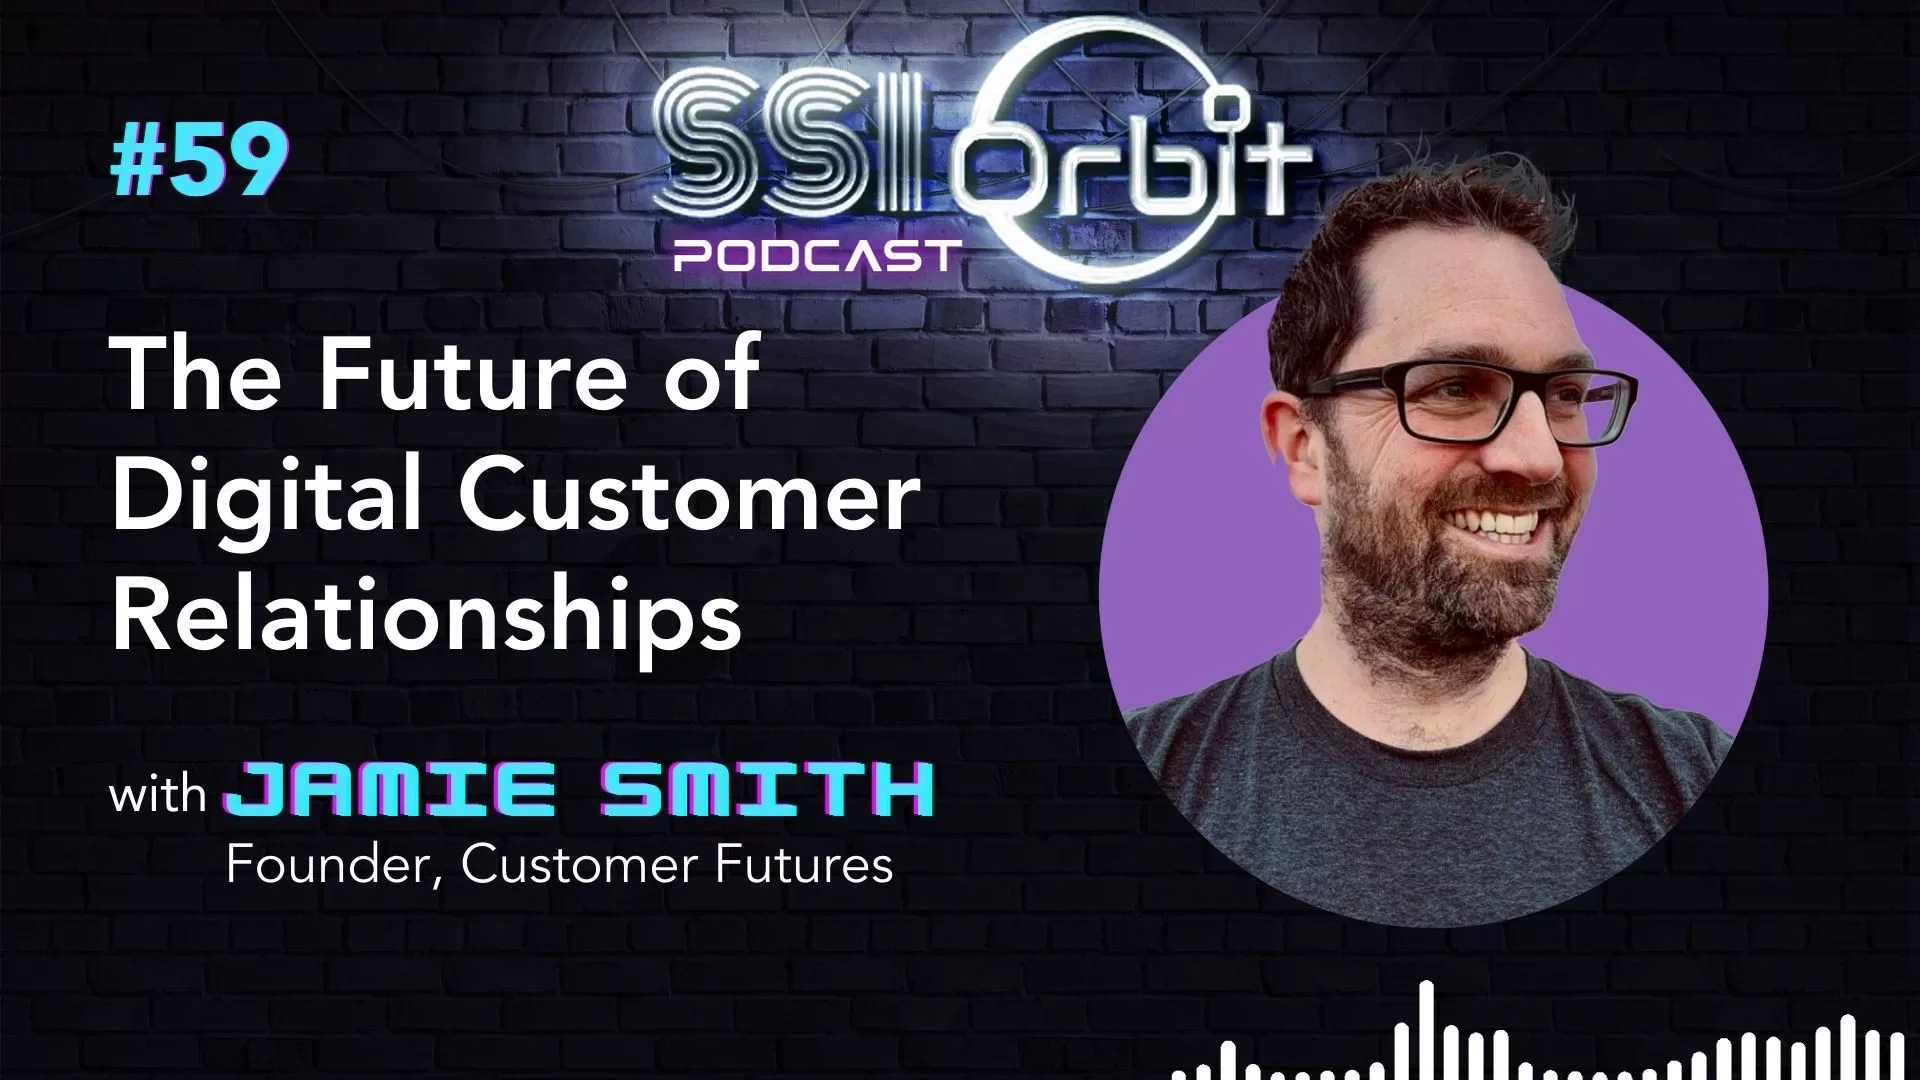 The Future of Digital Customer Relationships (with Jamie Smith)